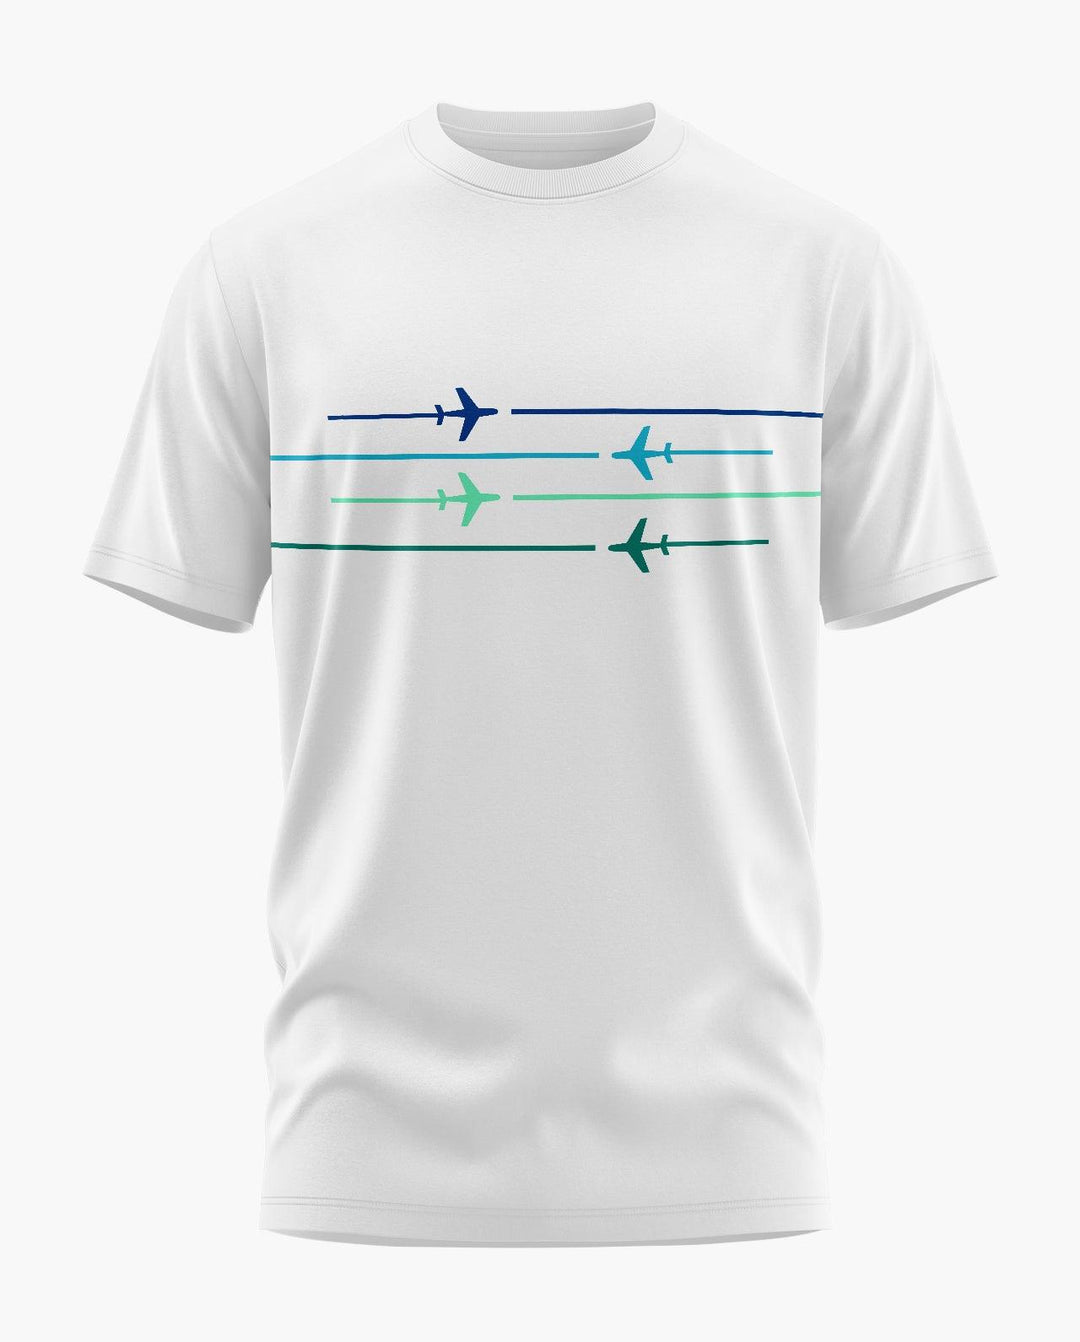 Sky Is The Limit T-Shirt - Aero Armour